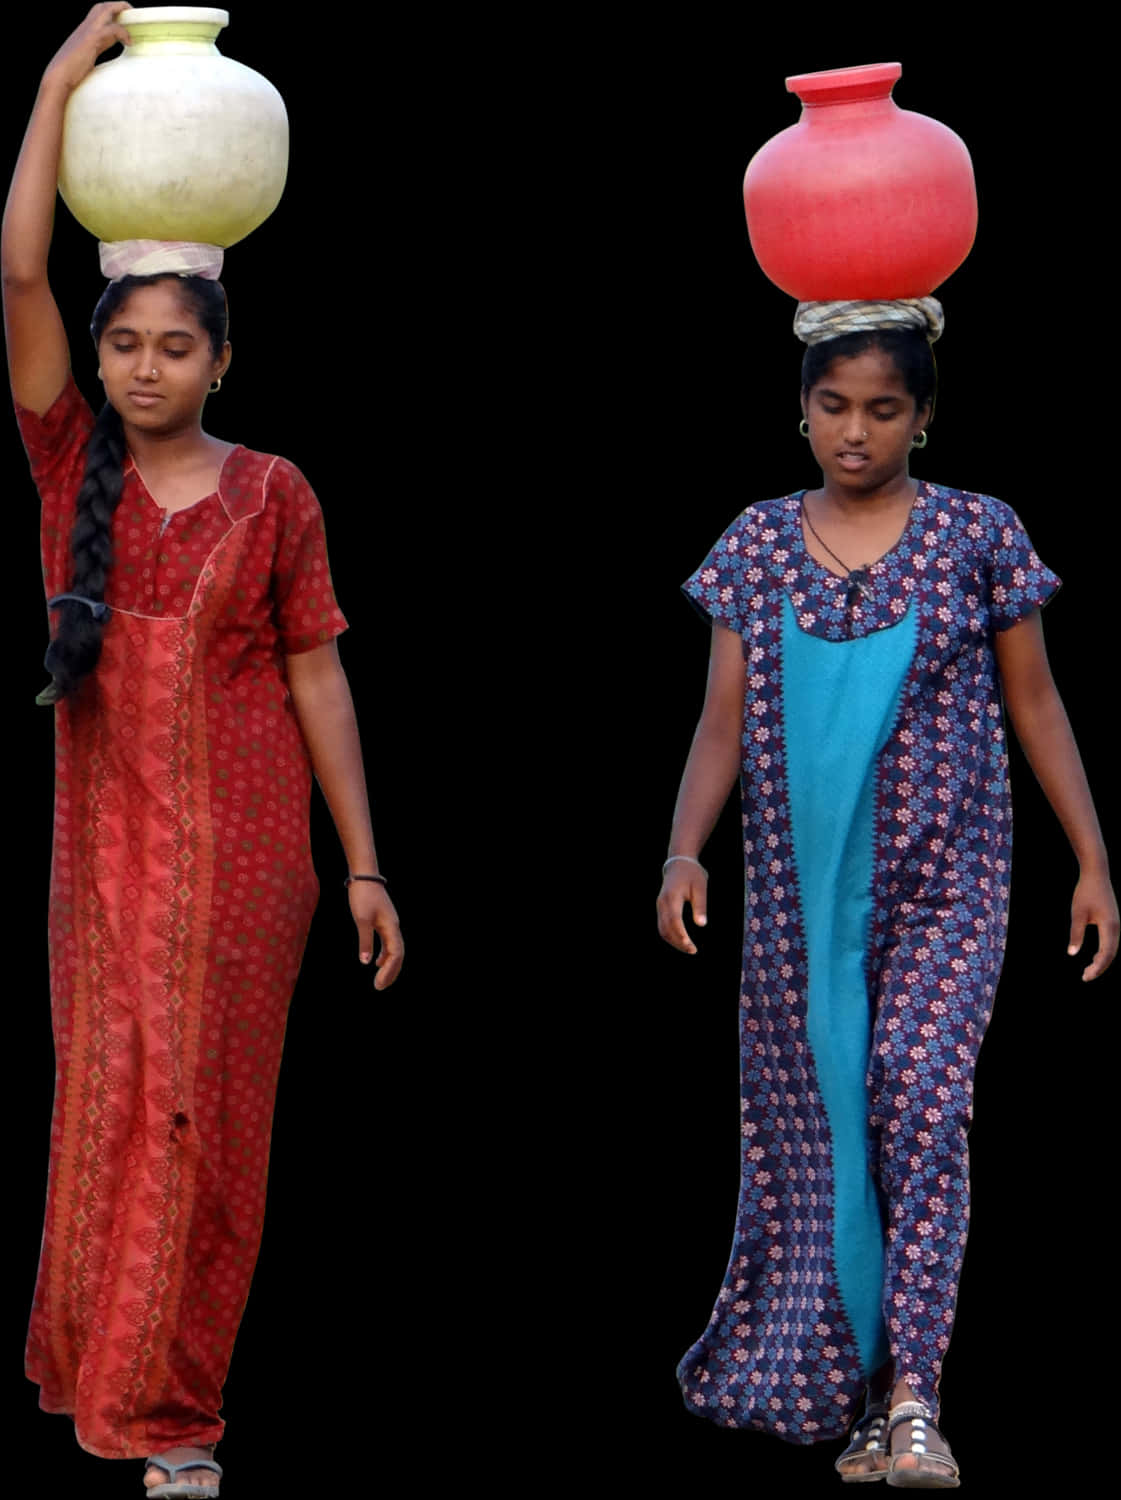 Two Girls In Long Dresses With A Ball On Their Head